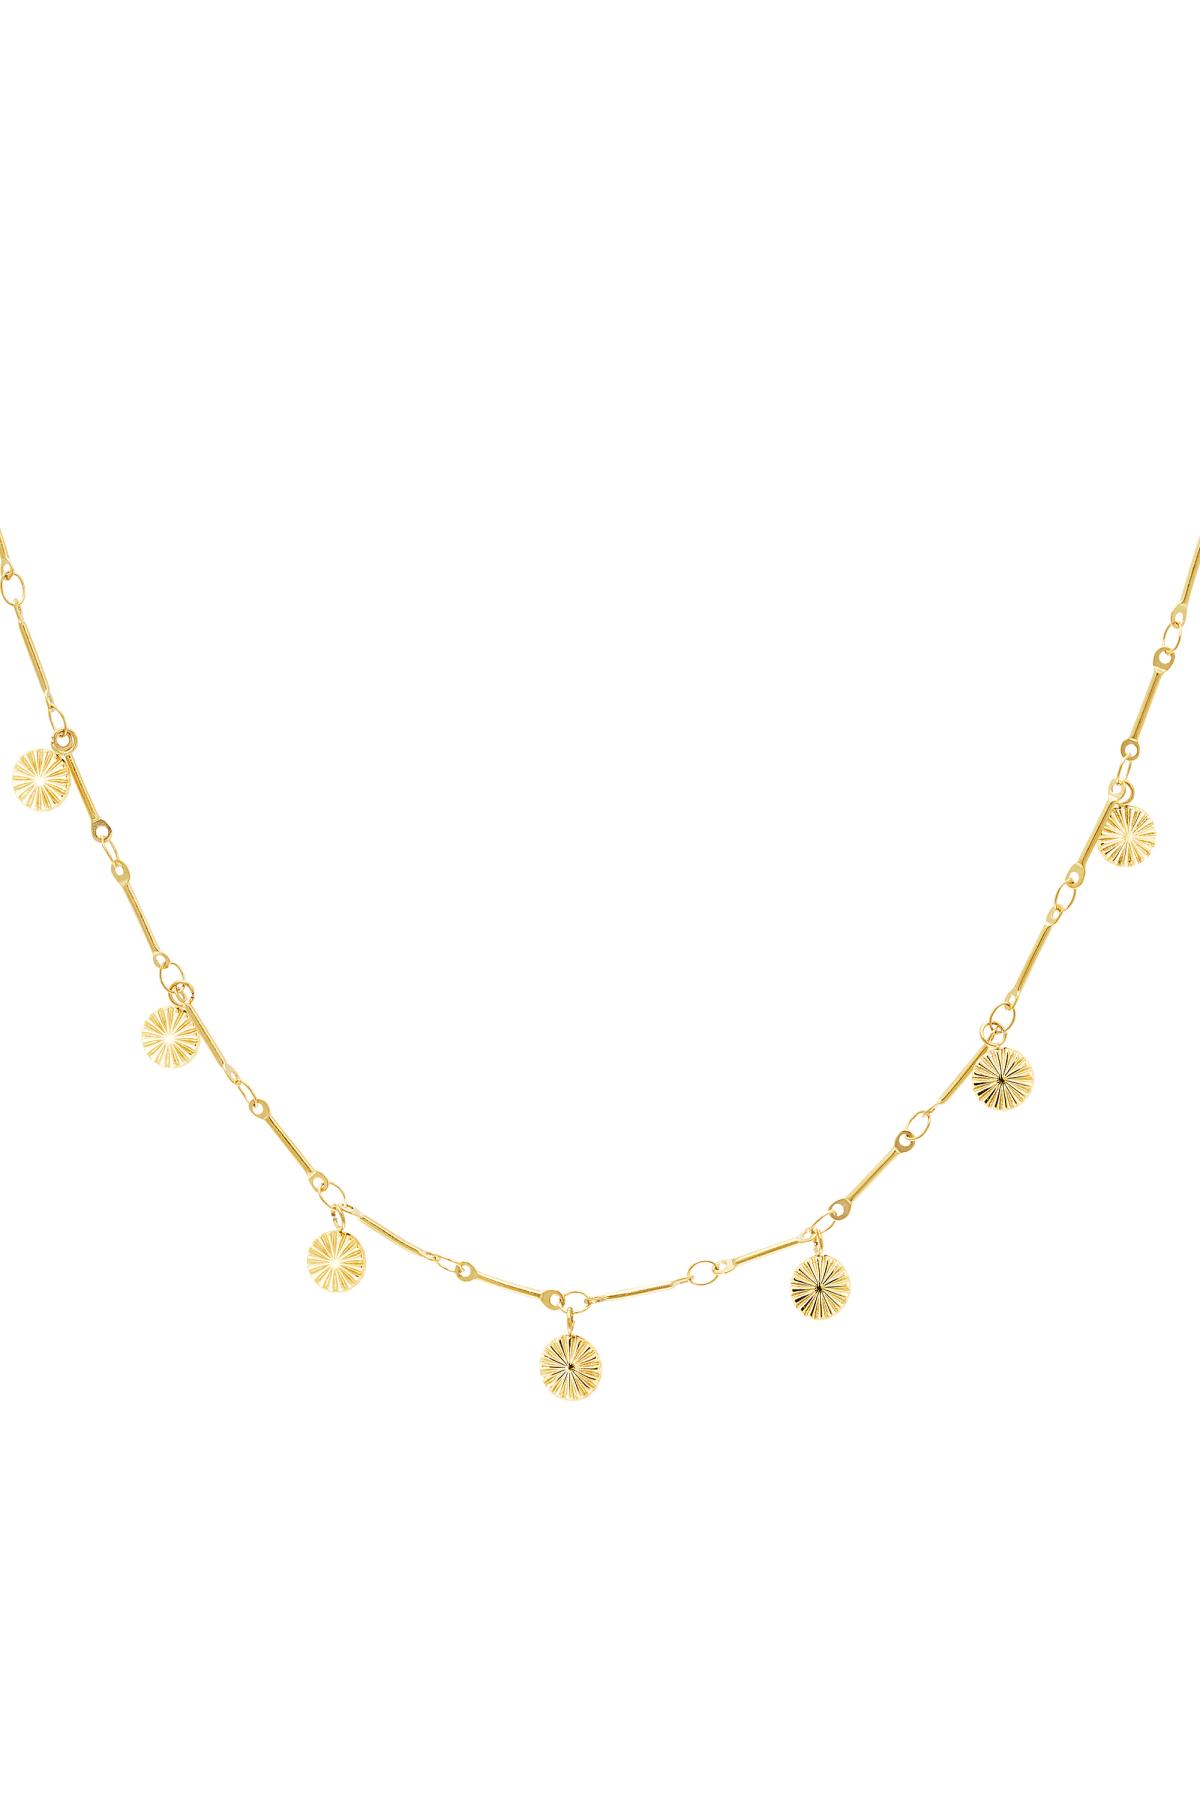 Collana con charms moneta fiore Gold Stainless Steel 